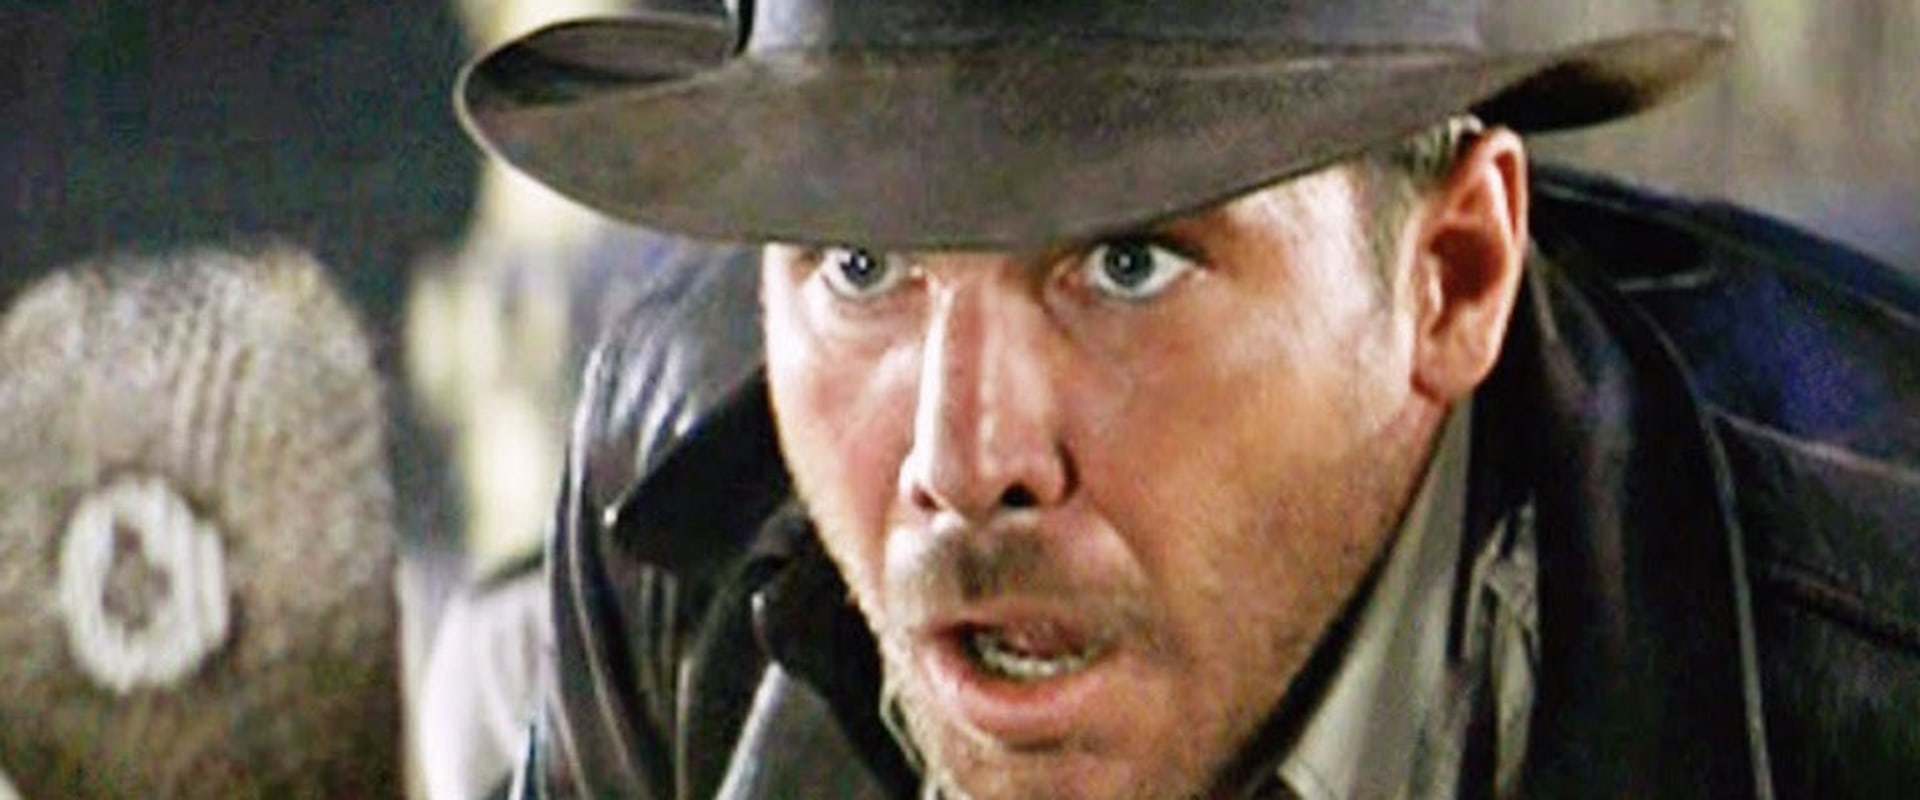 How much did harrison ford weigh in raiders of the lost ark?